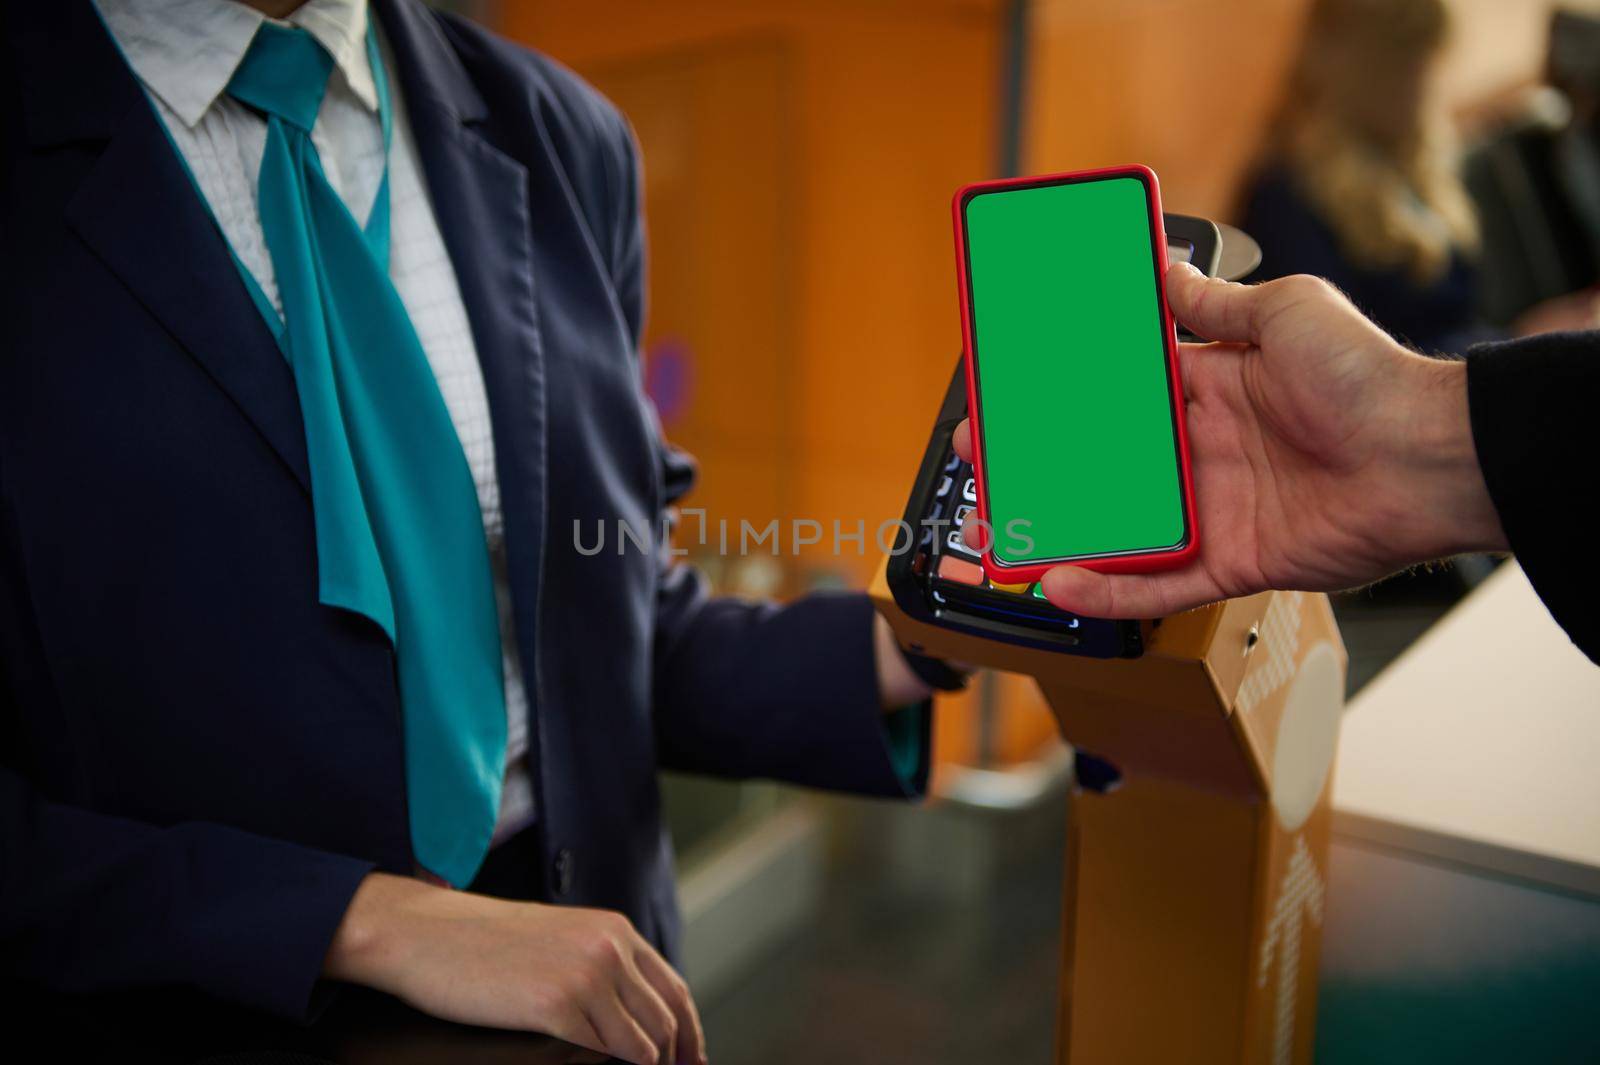 Close-up of male hand holding smartphone with green chroma key blank screen with copy space for mobile apps and advertising, near bank terminal while going through flight check-in board at airport by artgf